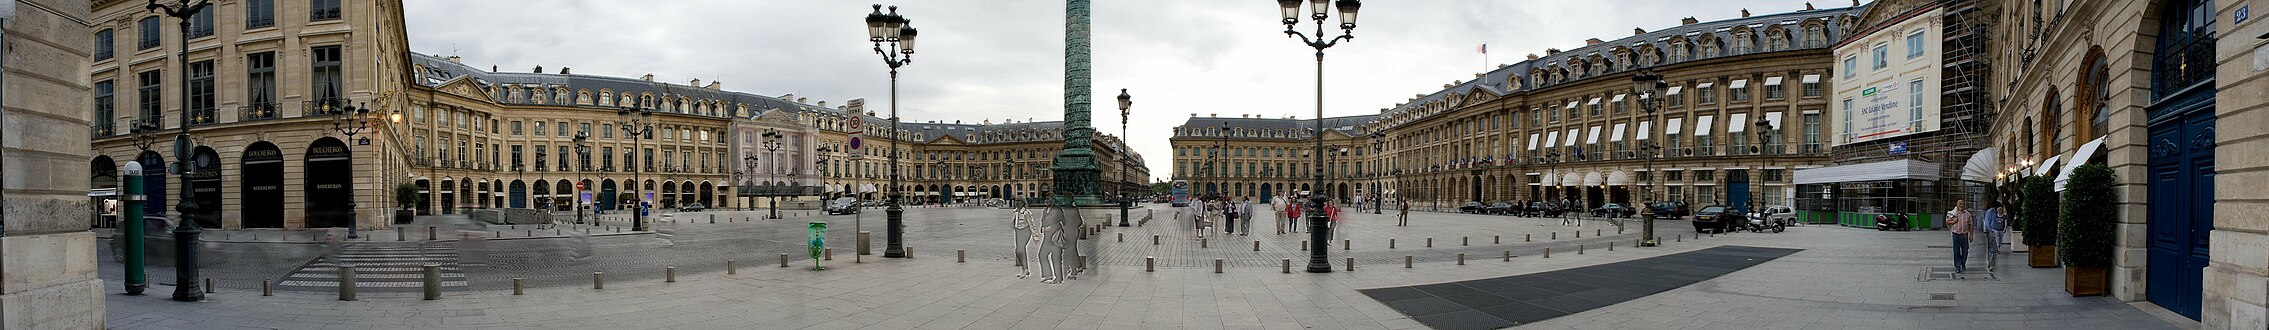 Panoramic view of the Place Vendôme